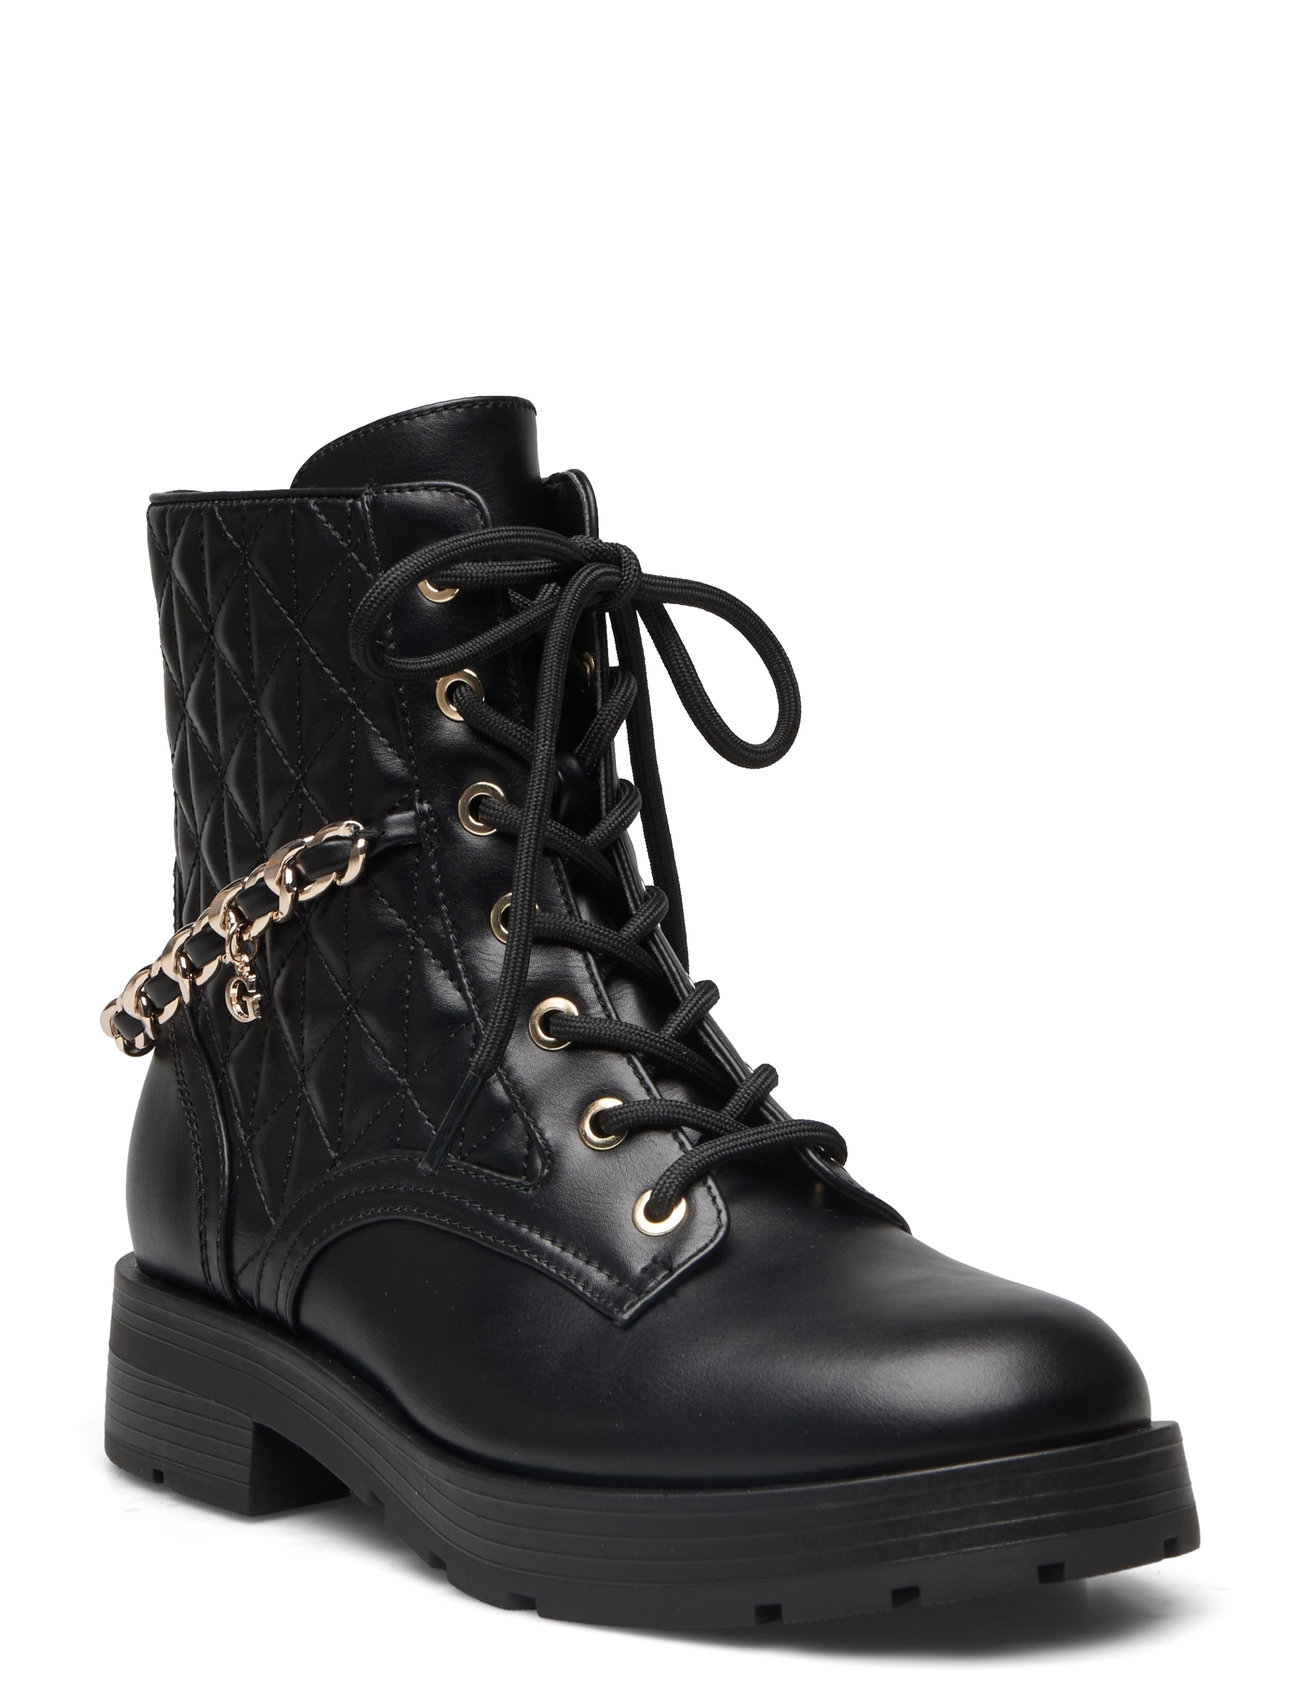 Xenia Shoes Boots Ankle Boots Laced Boots Black GUESS